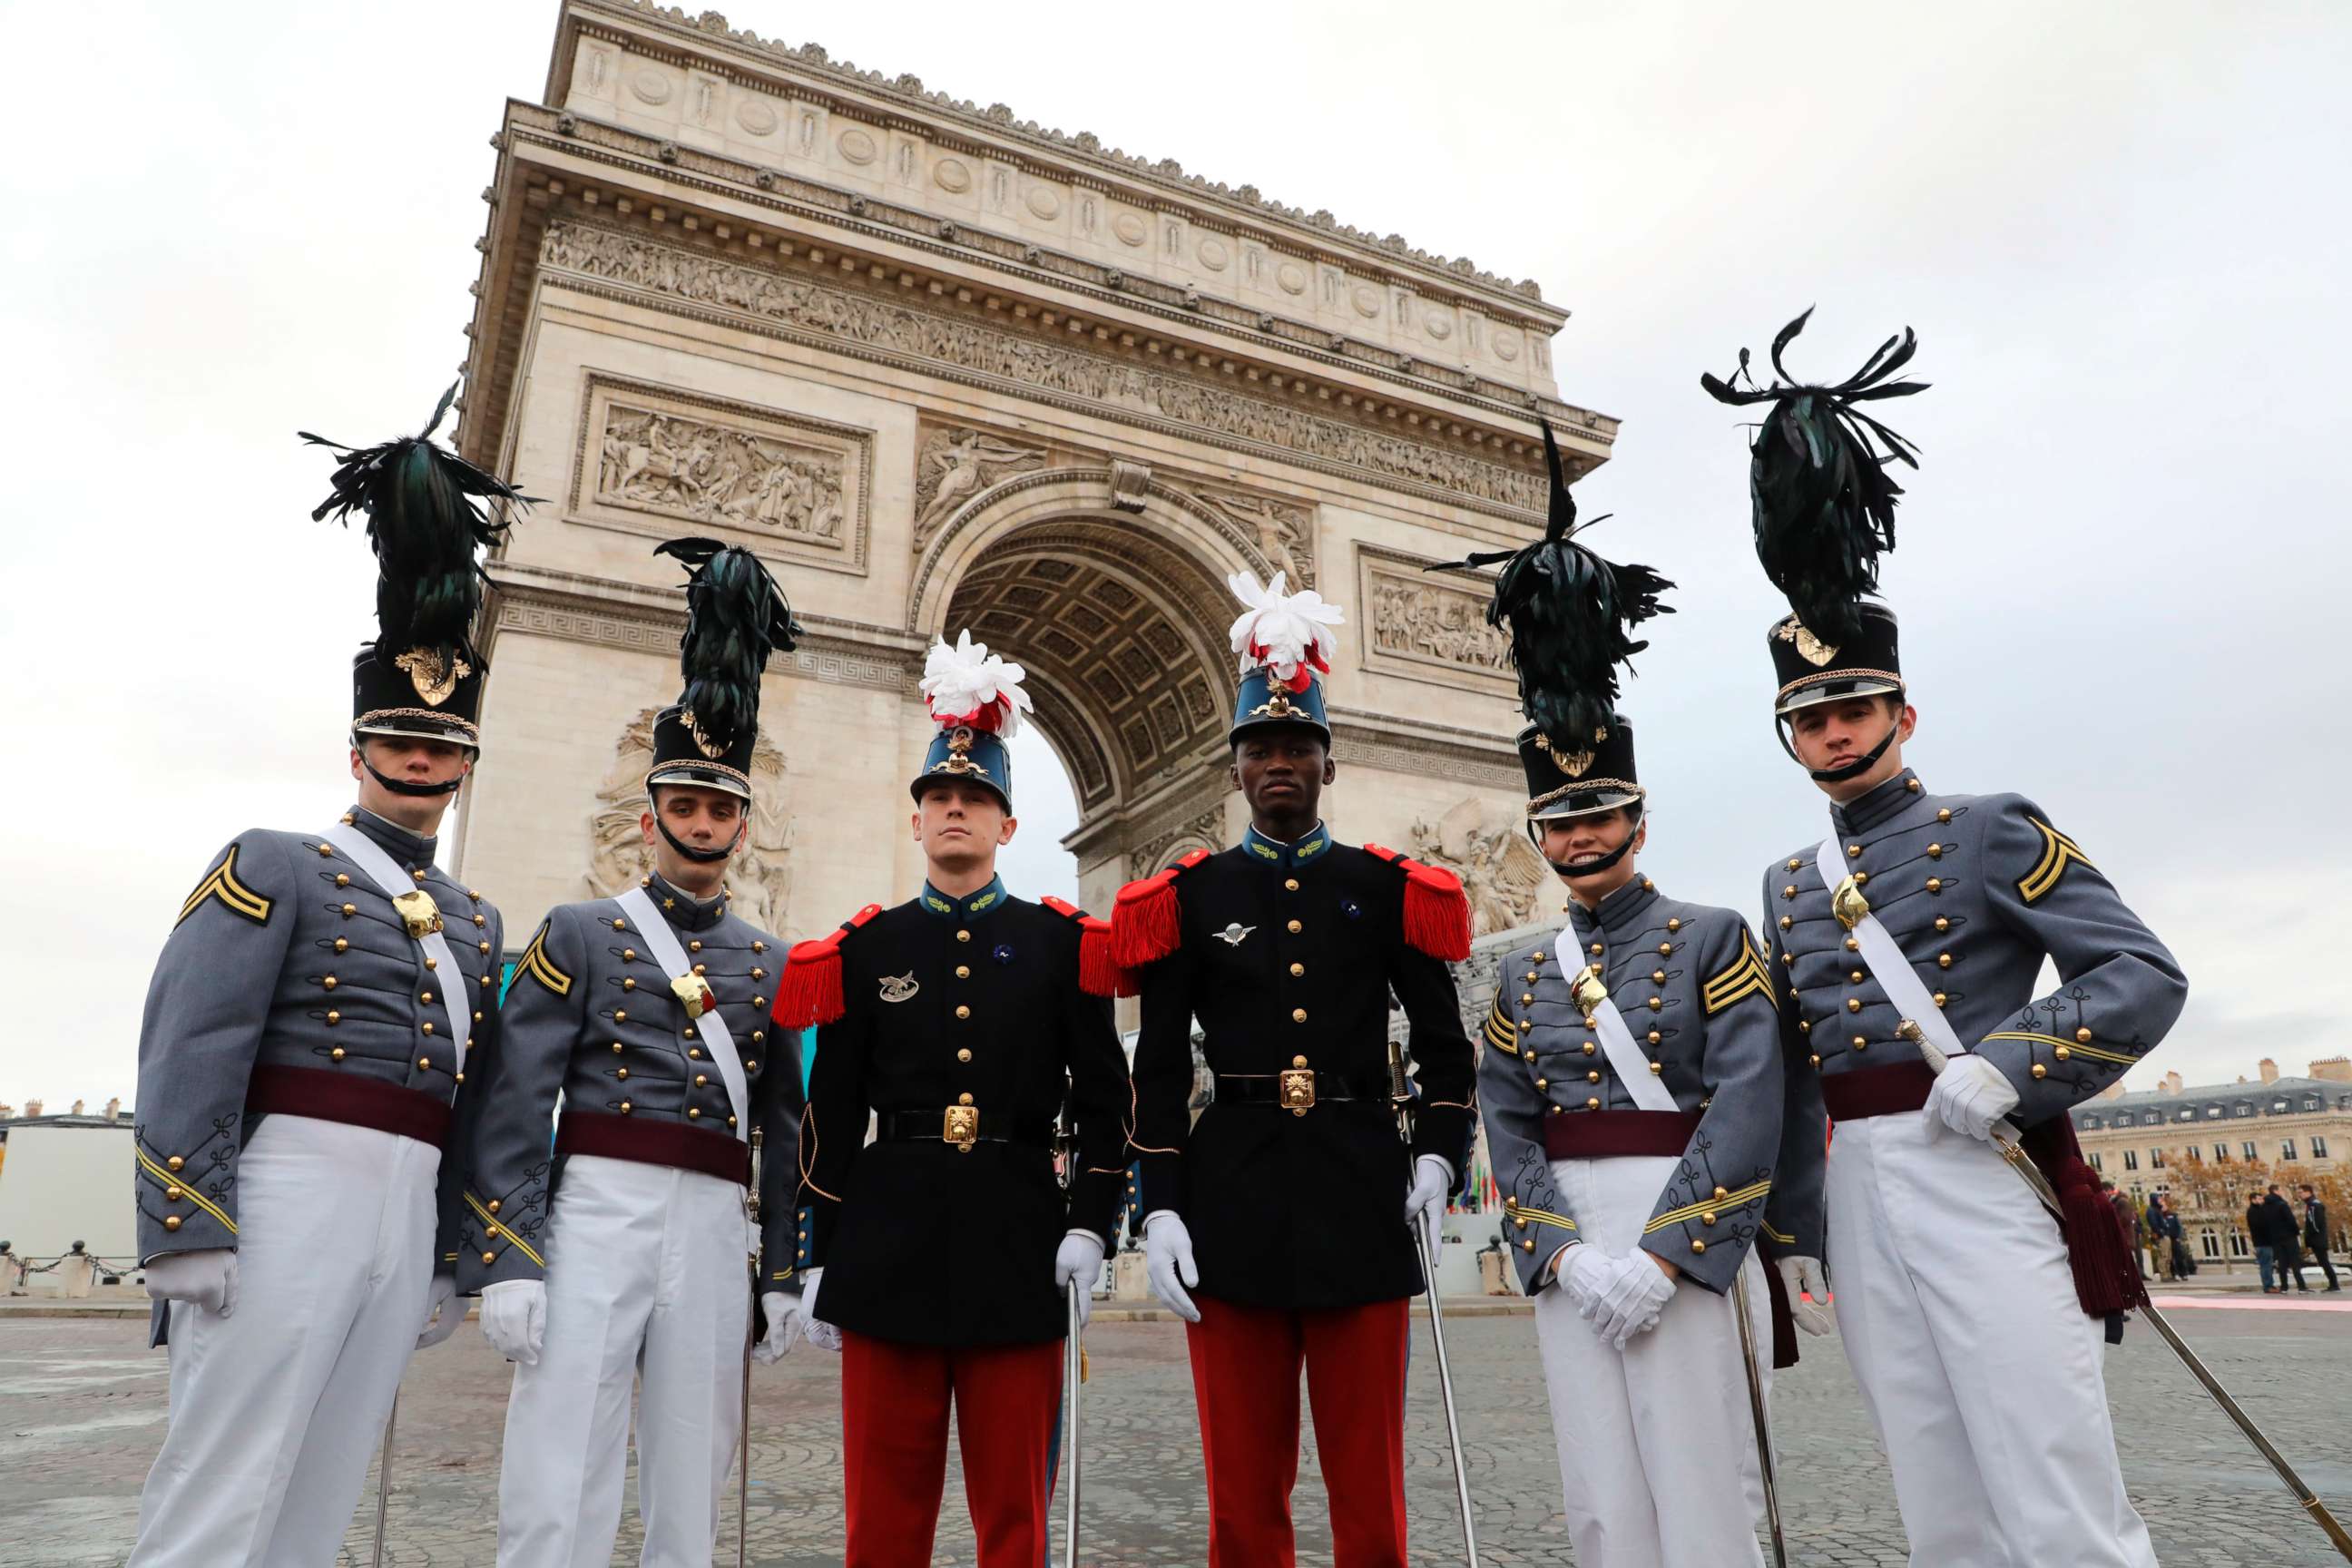 PHOTO: Saint-Cyr cadets, center, pose with West Point cadets ahead of a ceremony at the Arc de Triomphe in Paris, as part of commemorations marking the 100th anniversary of the Nov. 11, 1918, armistice, ending World War I, Nov. 11, 2018. 